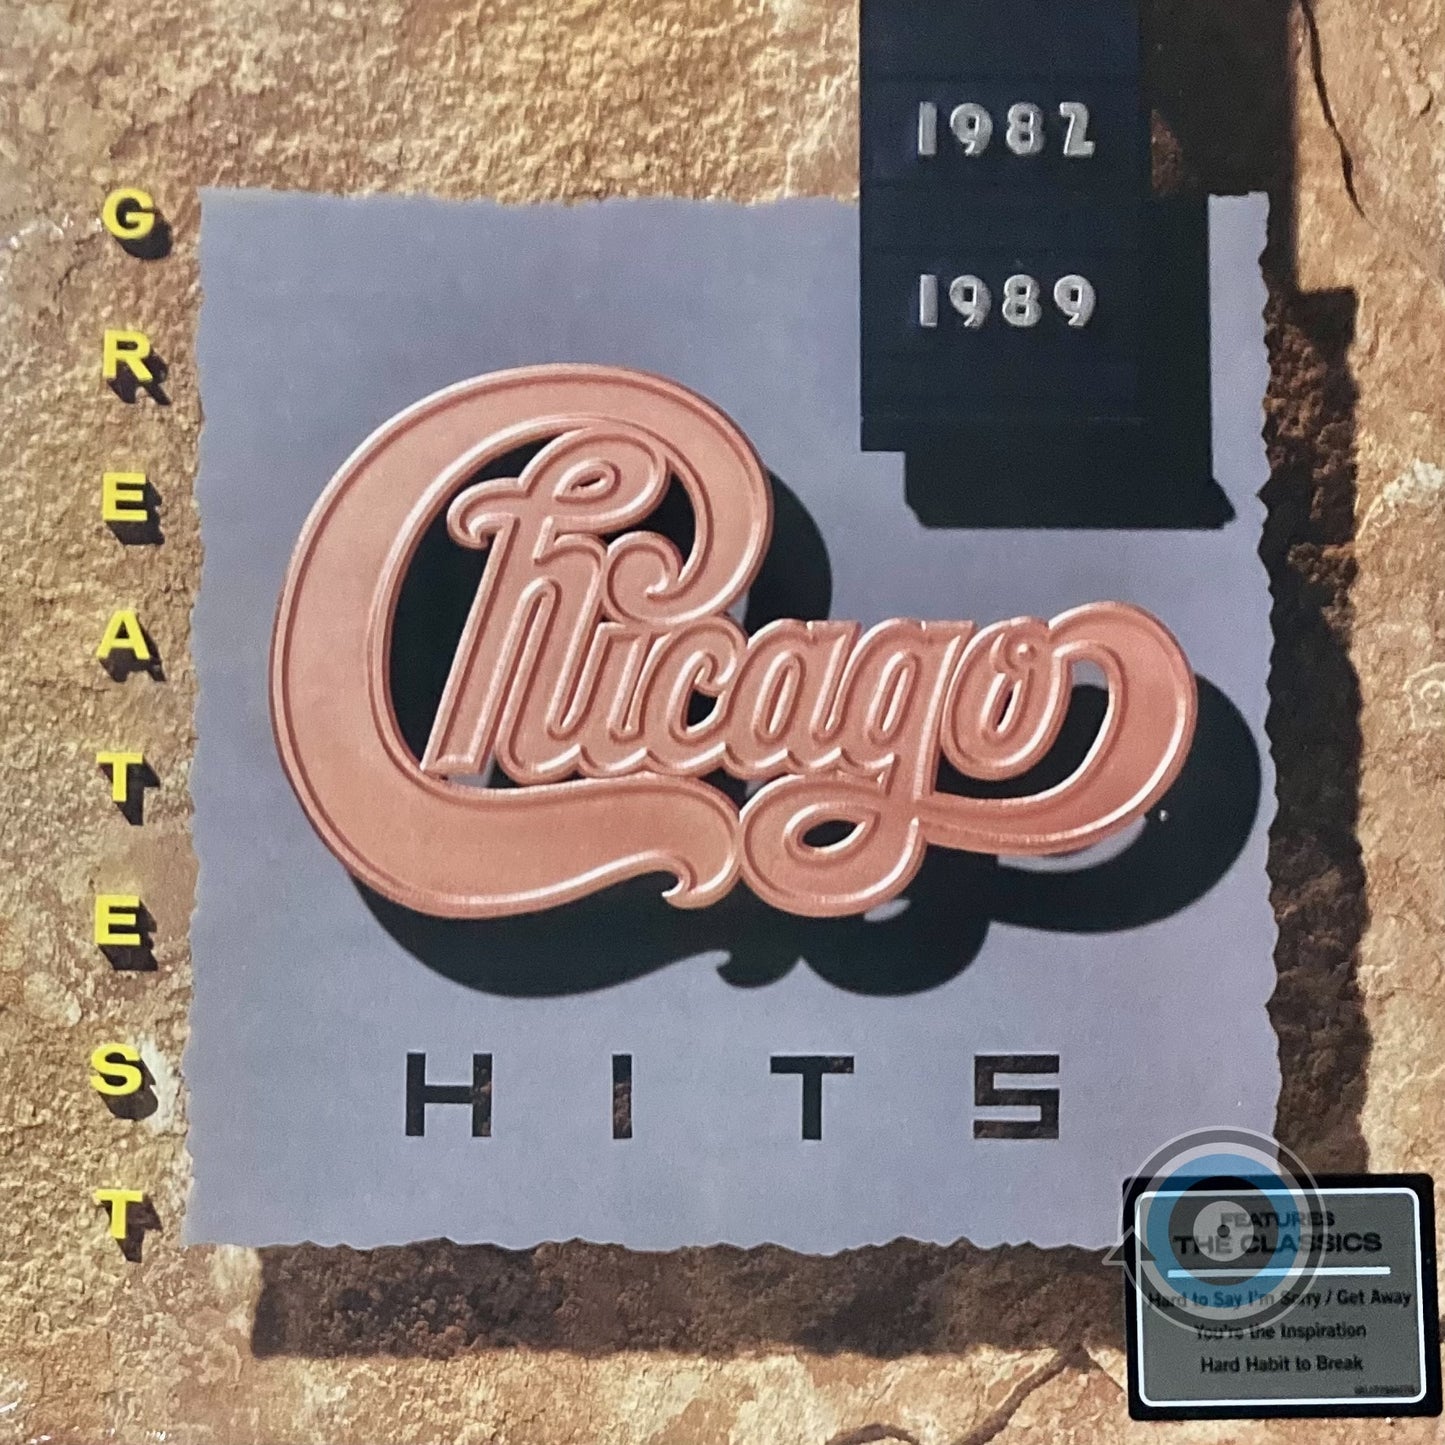 Chicago - Greatest Hits 1982-1989 LP (Sealed)